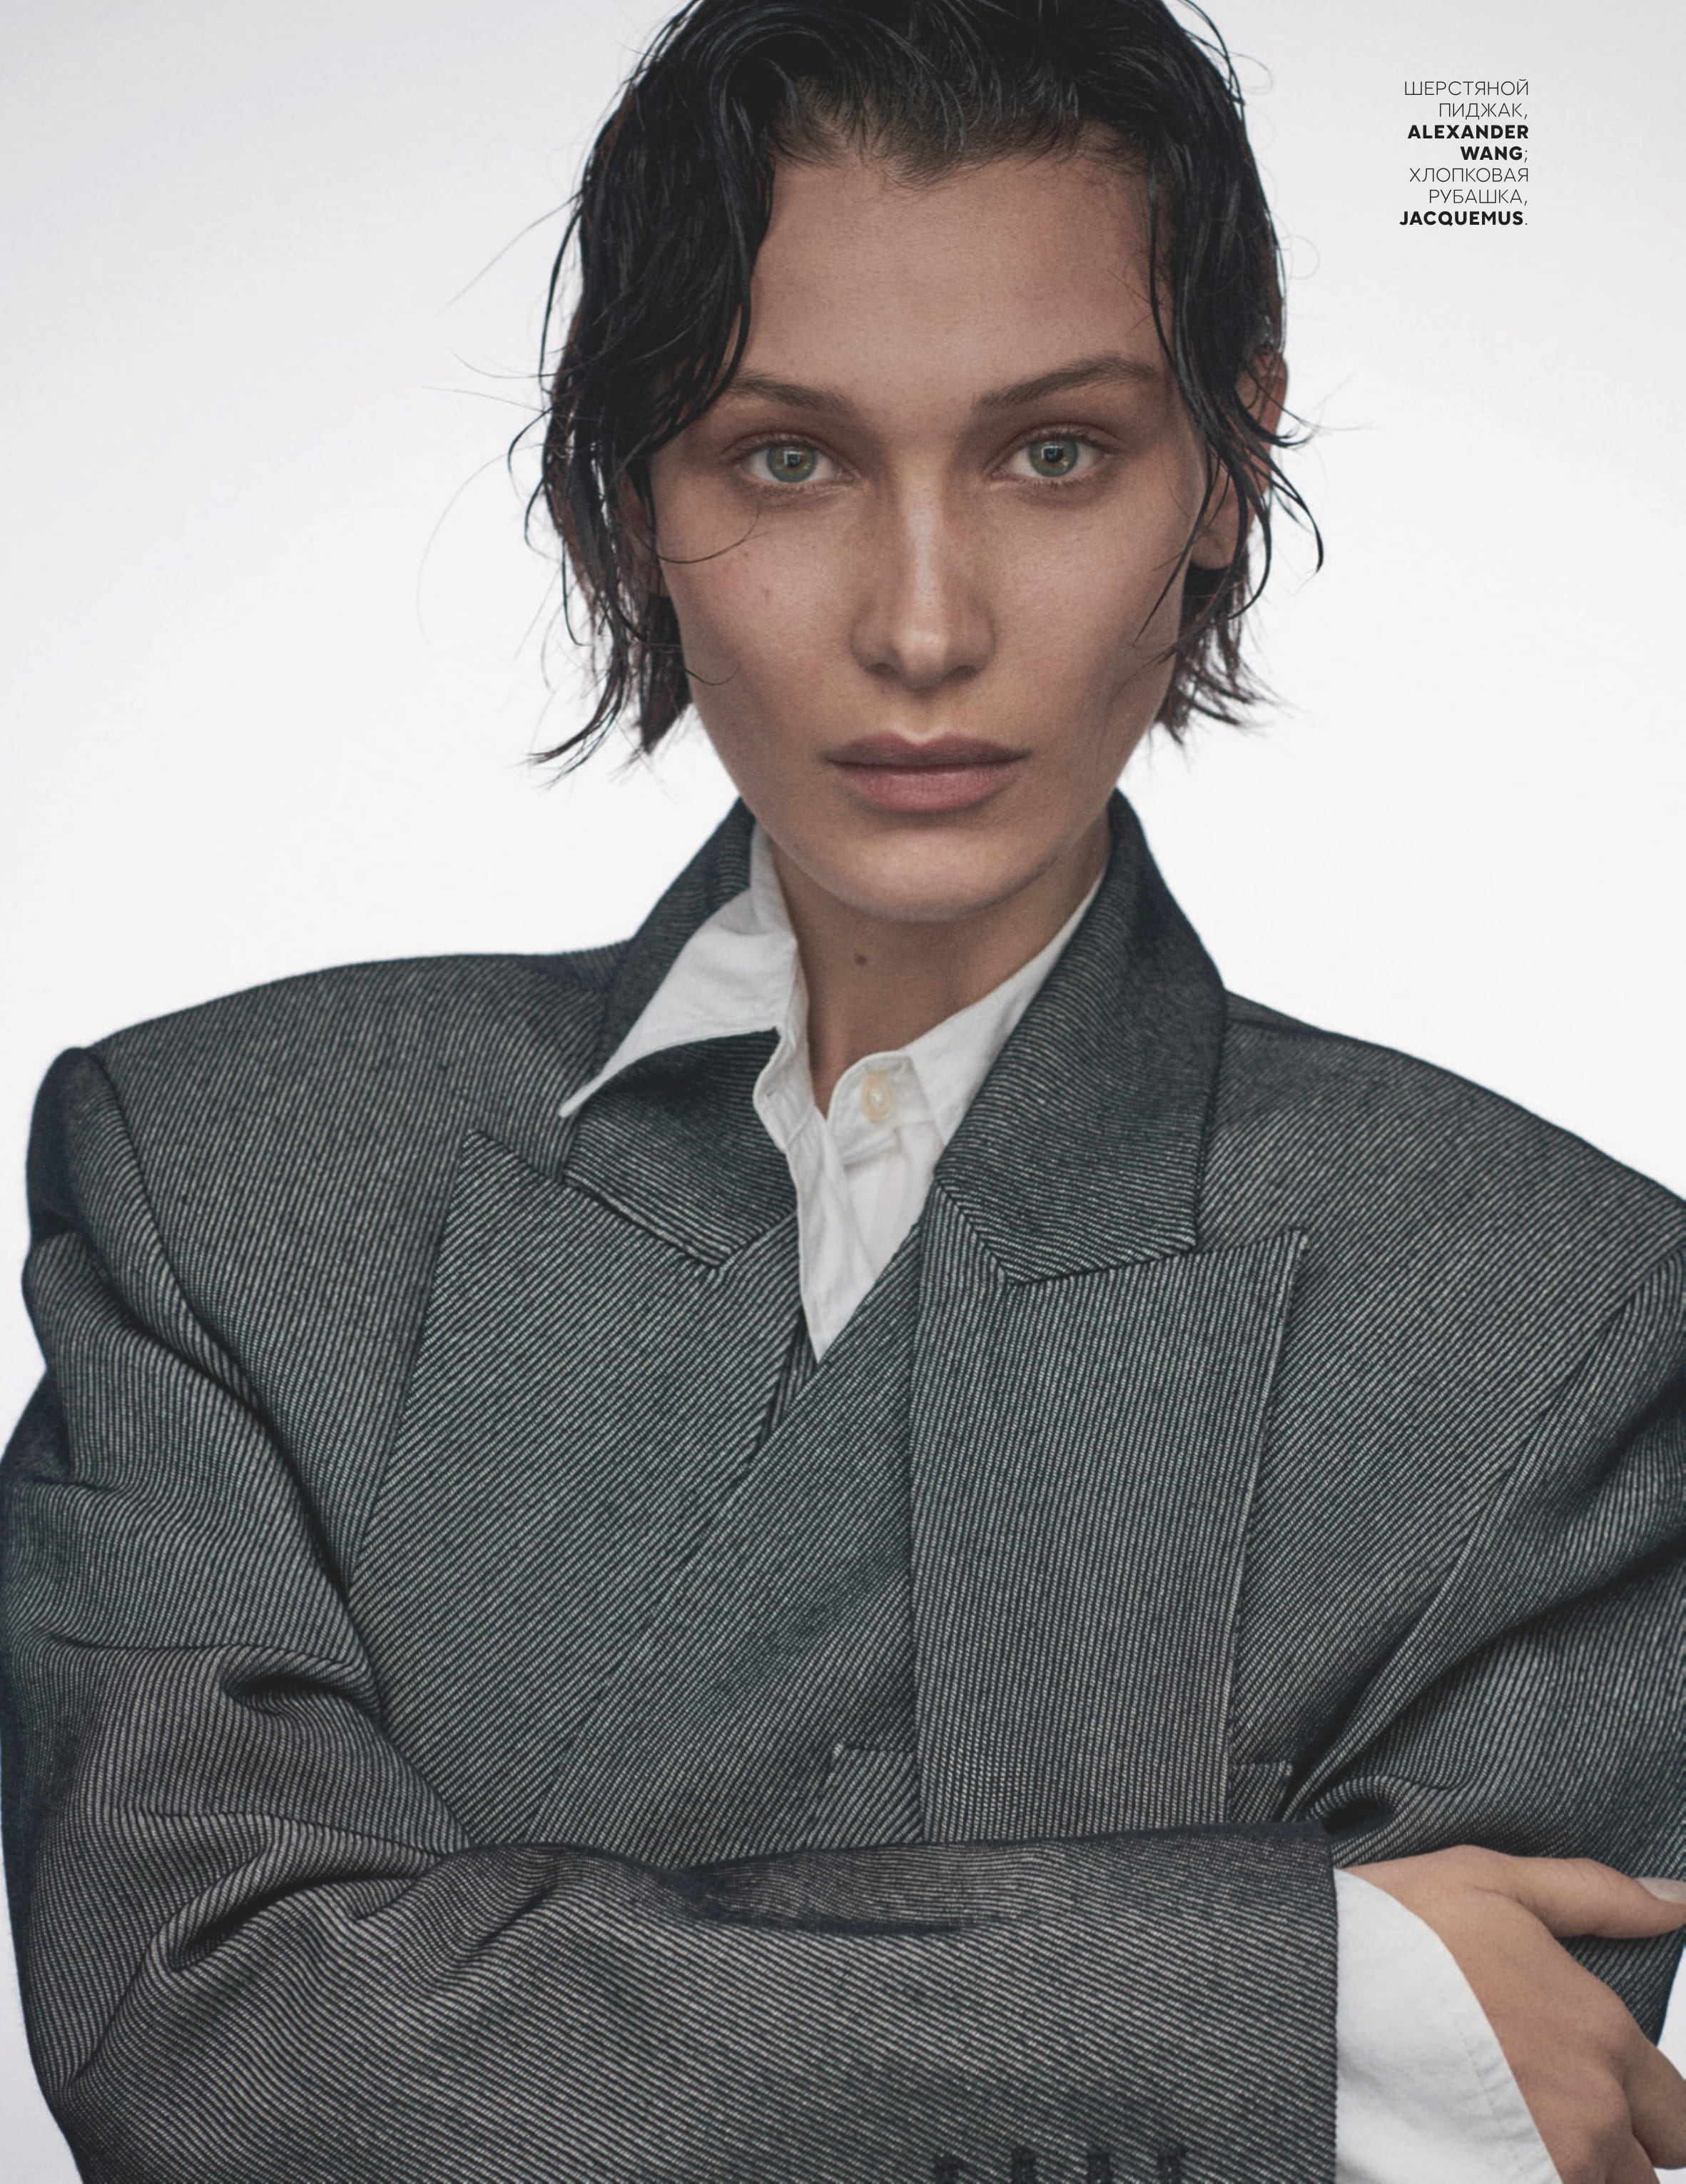 Bella Hadid by Giampaolo Sgura for Vogue Russia March 2019 (13).jpg